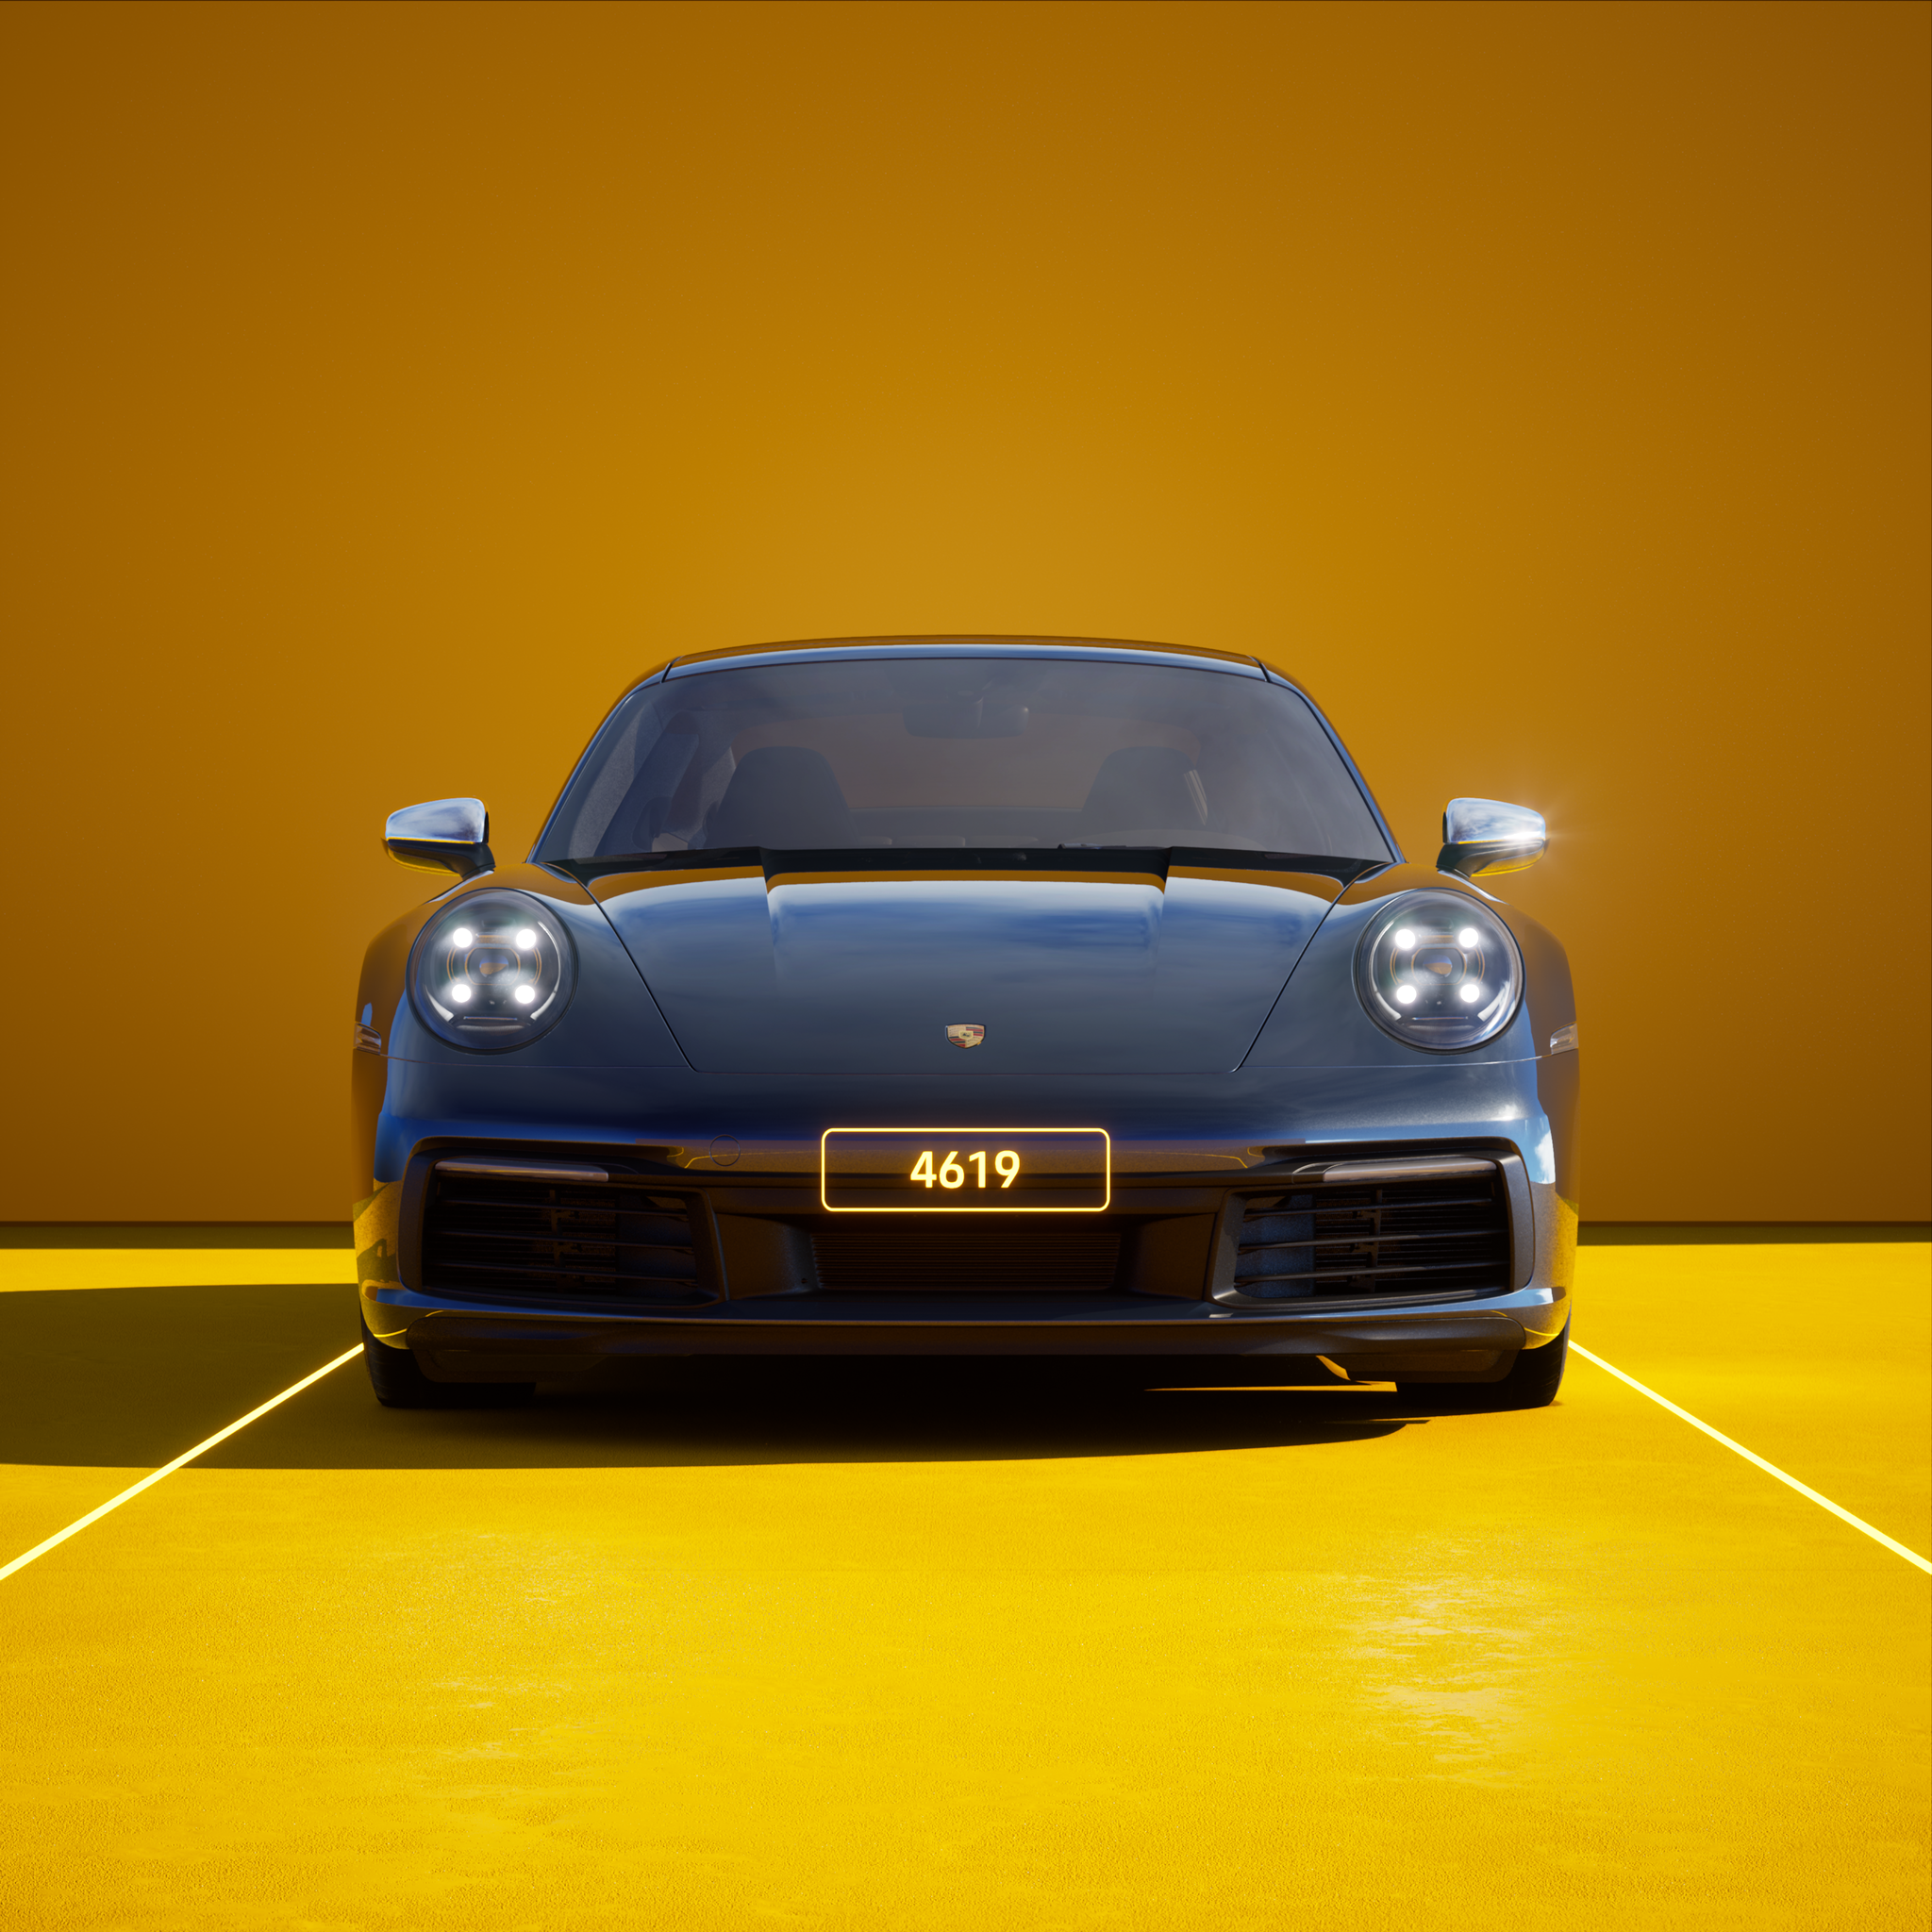 The PORSCHΞ 911 4619 image in phase